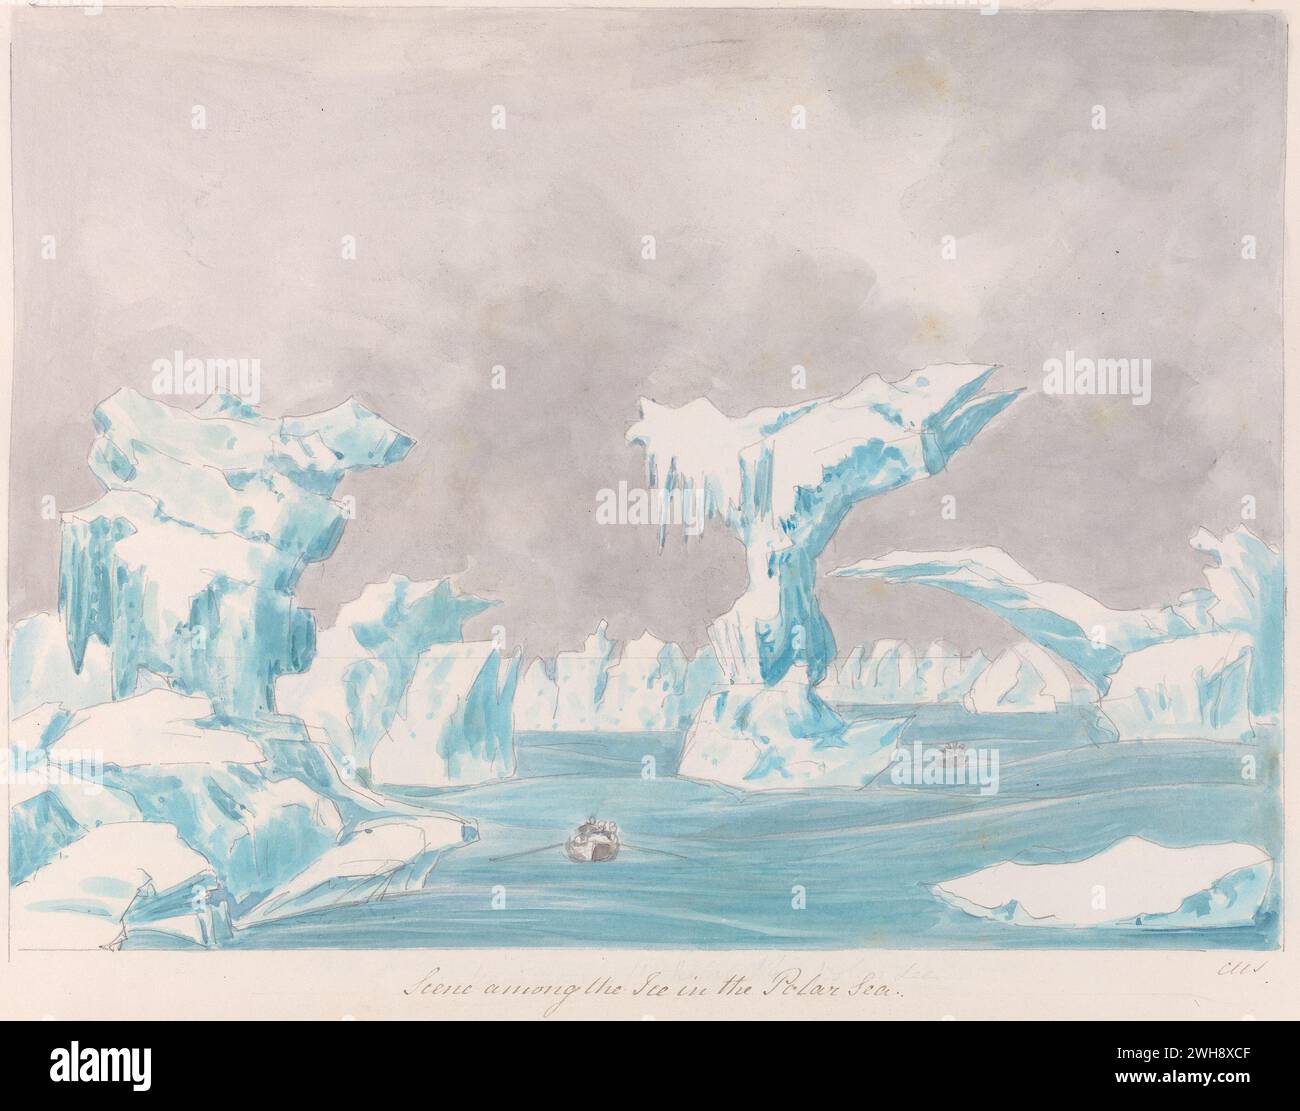 'Scene Among the Ice in the Polar Sea' from the book 'Views of Polar Regions' by Charles Hamilton Smith, Belgian, undated, Watercolor and graphite on moderately thick, moderately textured, cream wove paper, Stock Photo